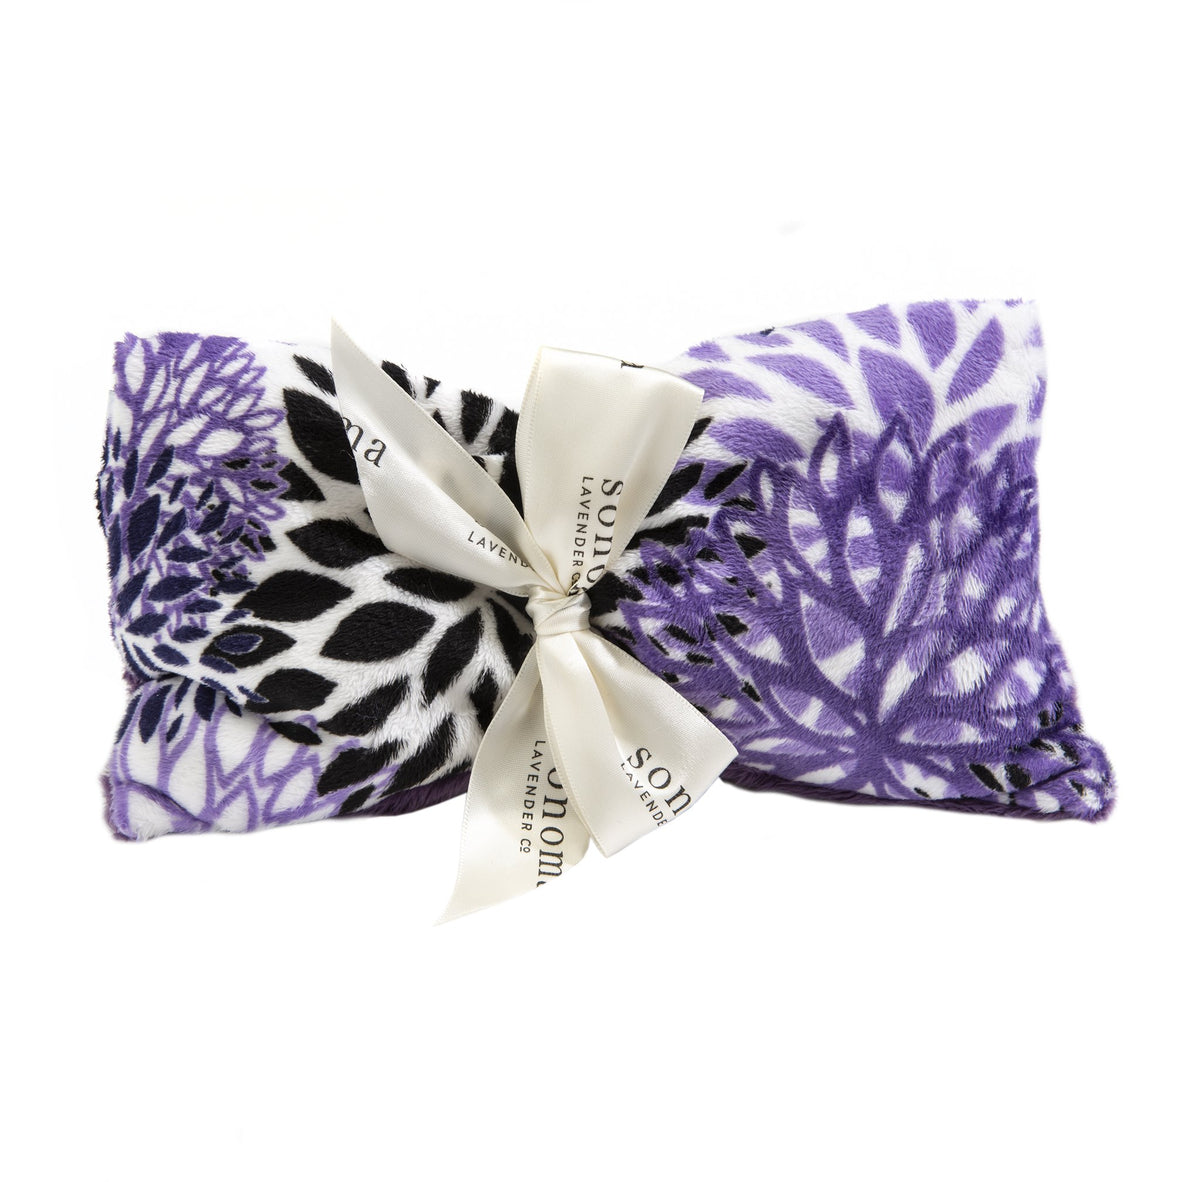 A Sonoma Lavender Purple Bloom spa mask featuring a purple and white floral pattern, adorned with a cream ribbon tied in a bow, labeled "saje wellness lavender relaxation.